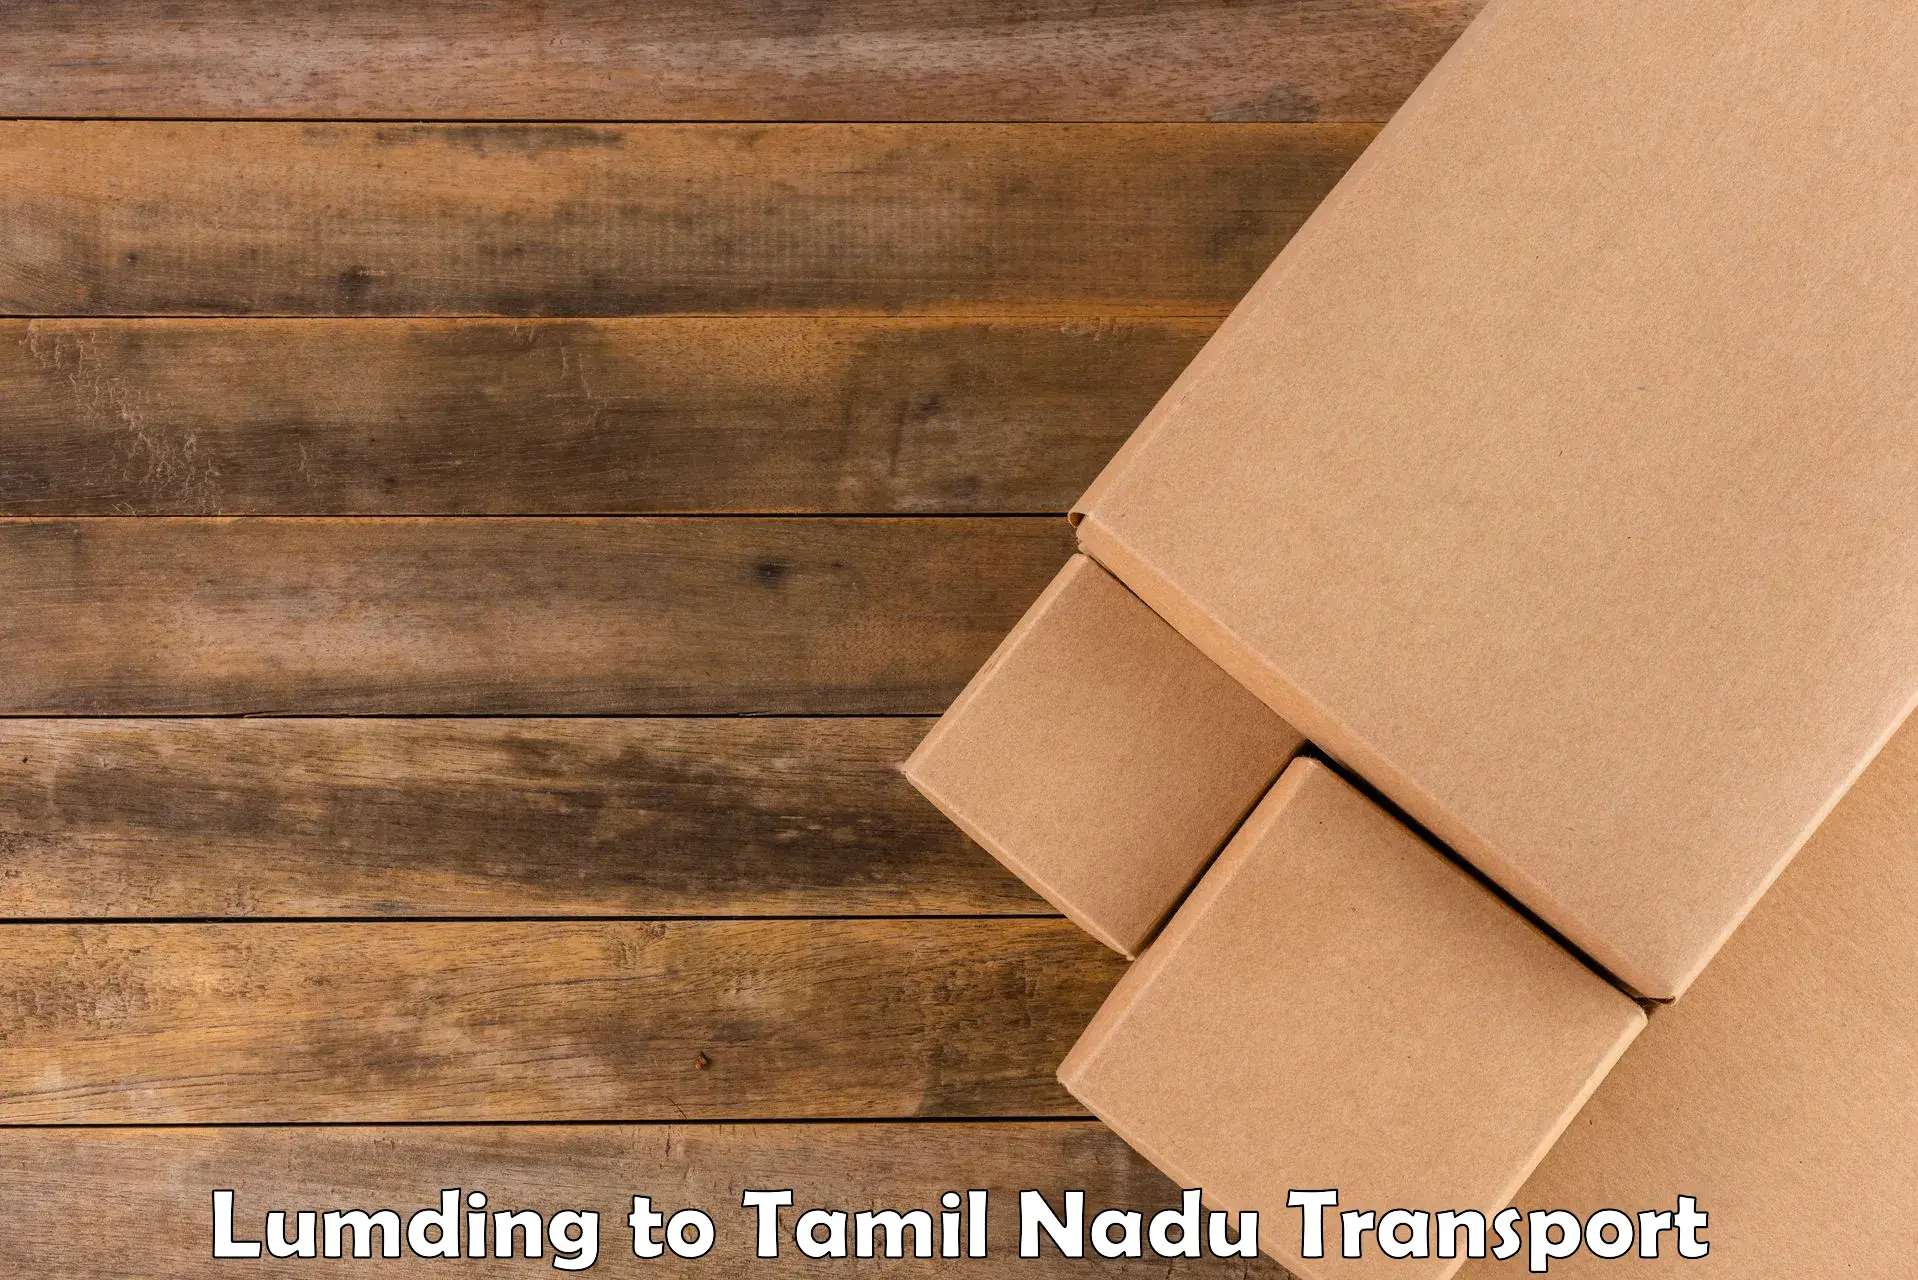 Cargo transport services Lumding to Vellore Institute of Technology